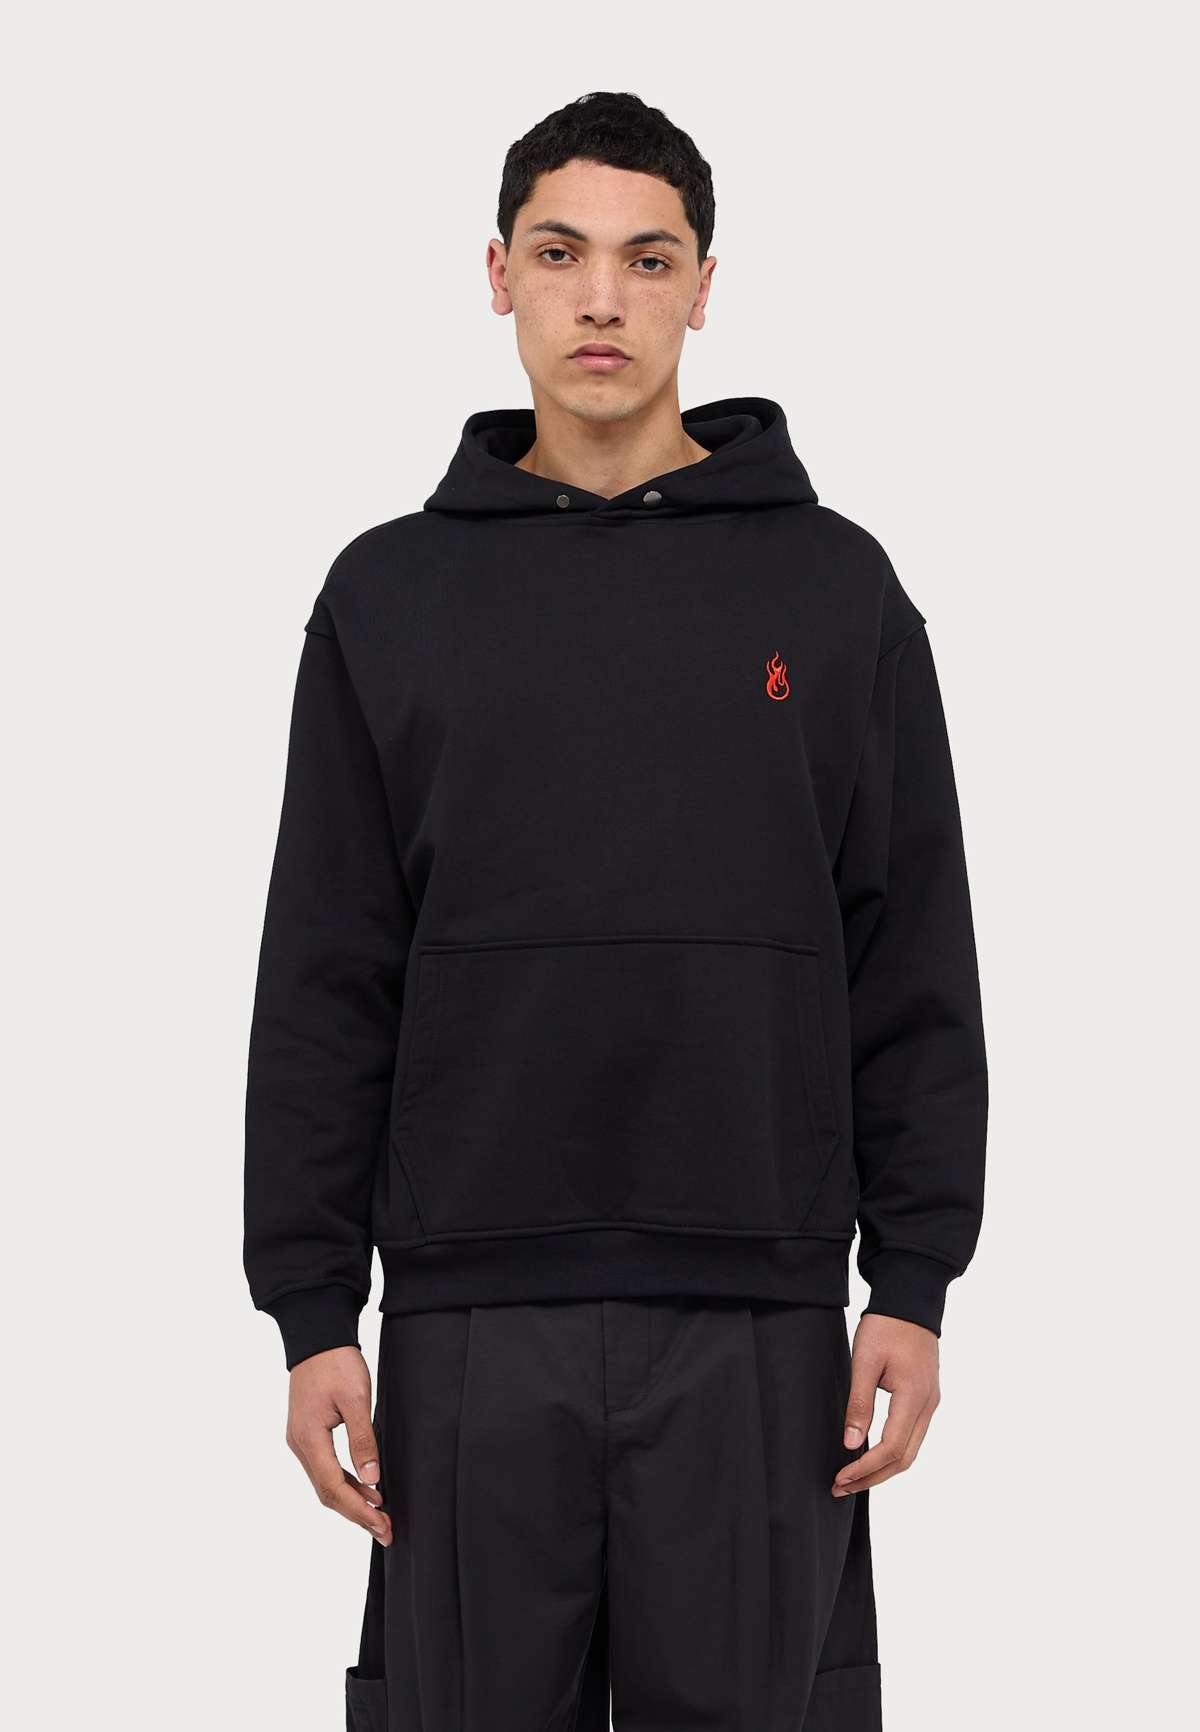 Пуловер HOODIE WITH FLAMES LOGO AND LABEL